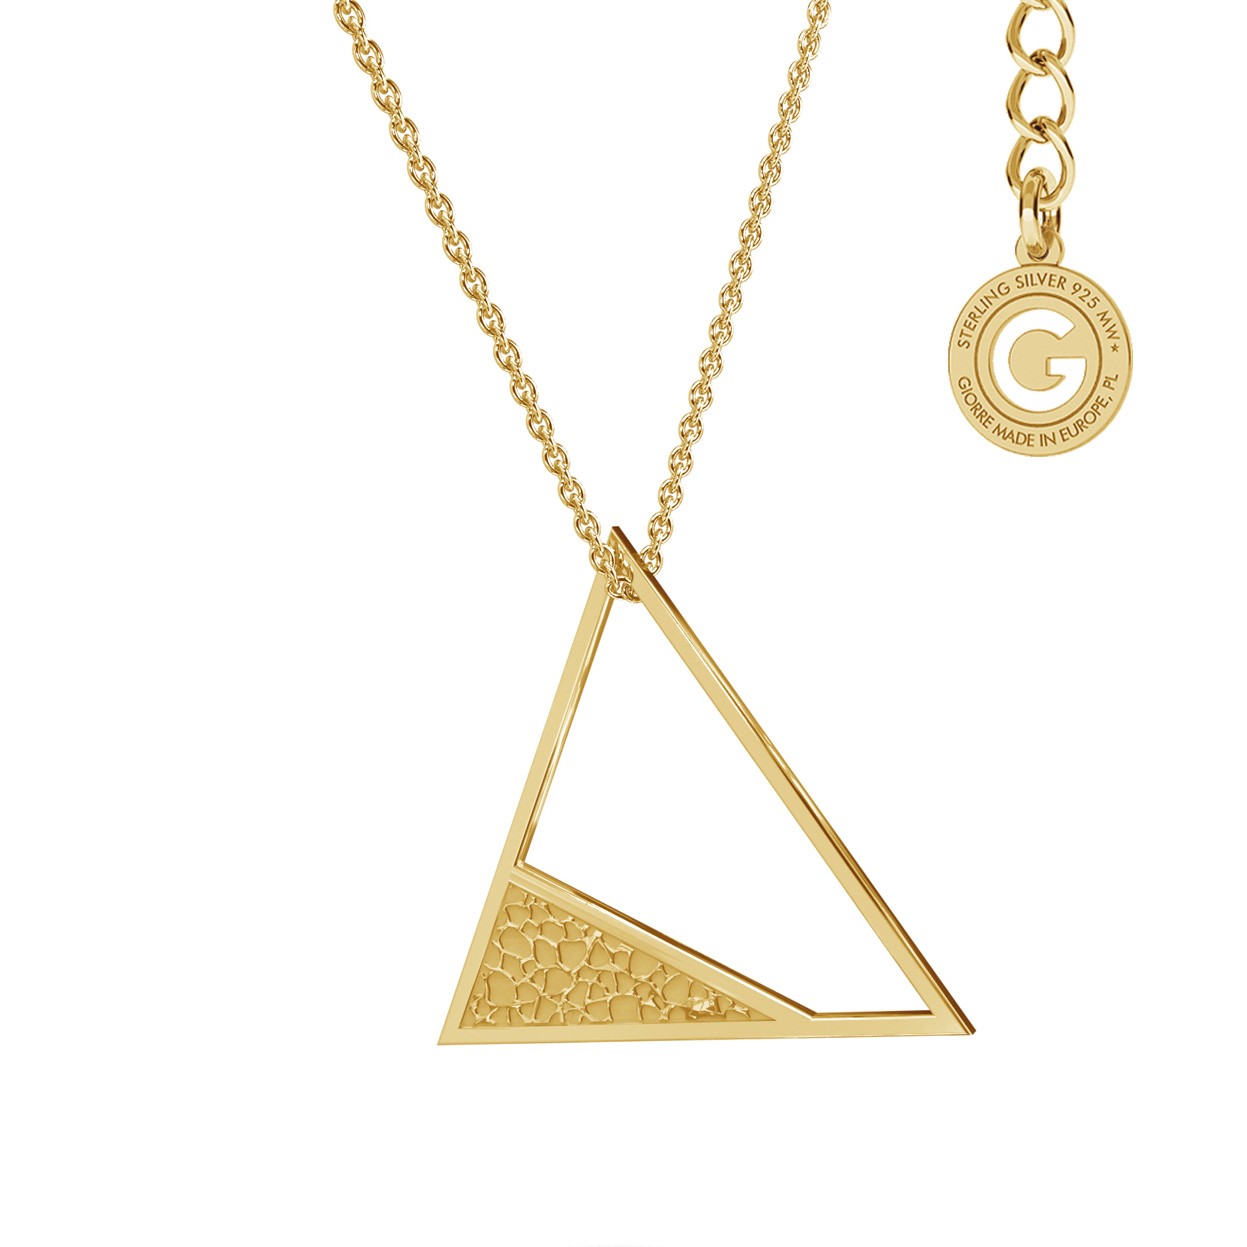 Geometric necklace triangle pendant, sterling silver 925